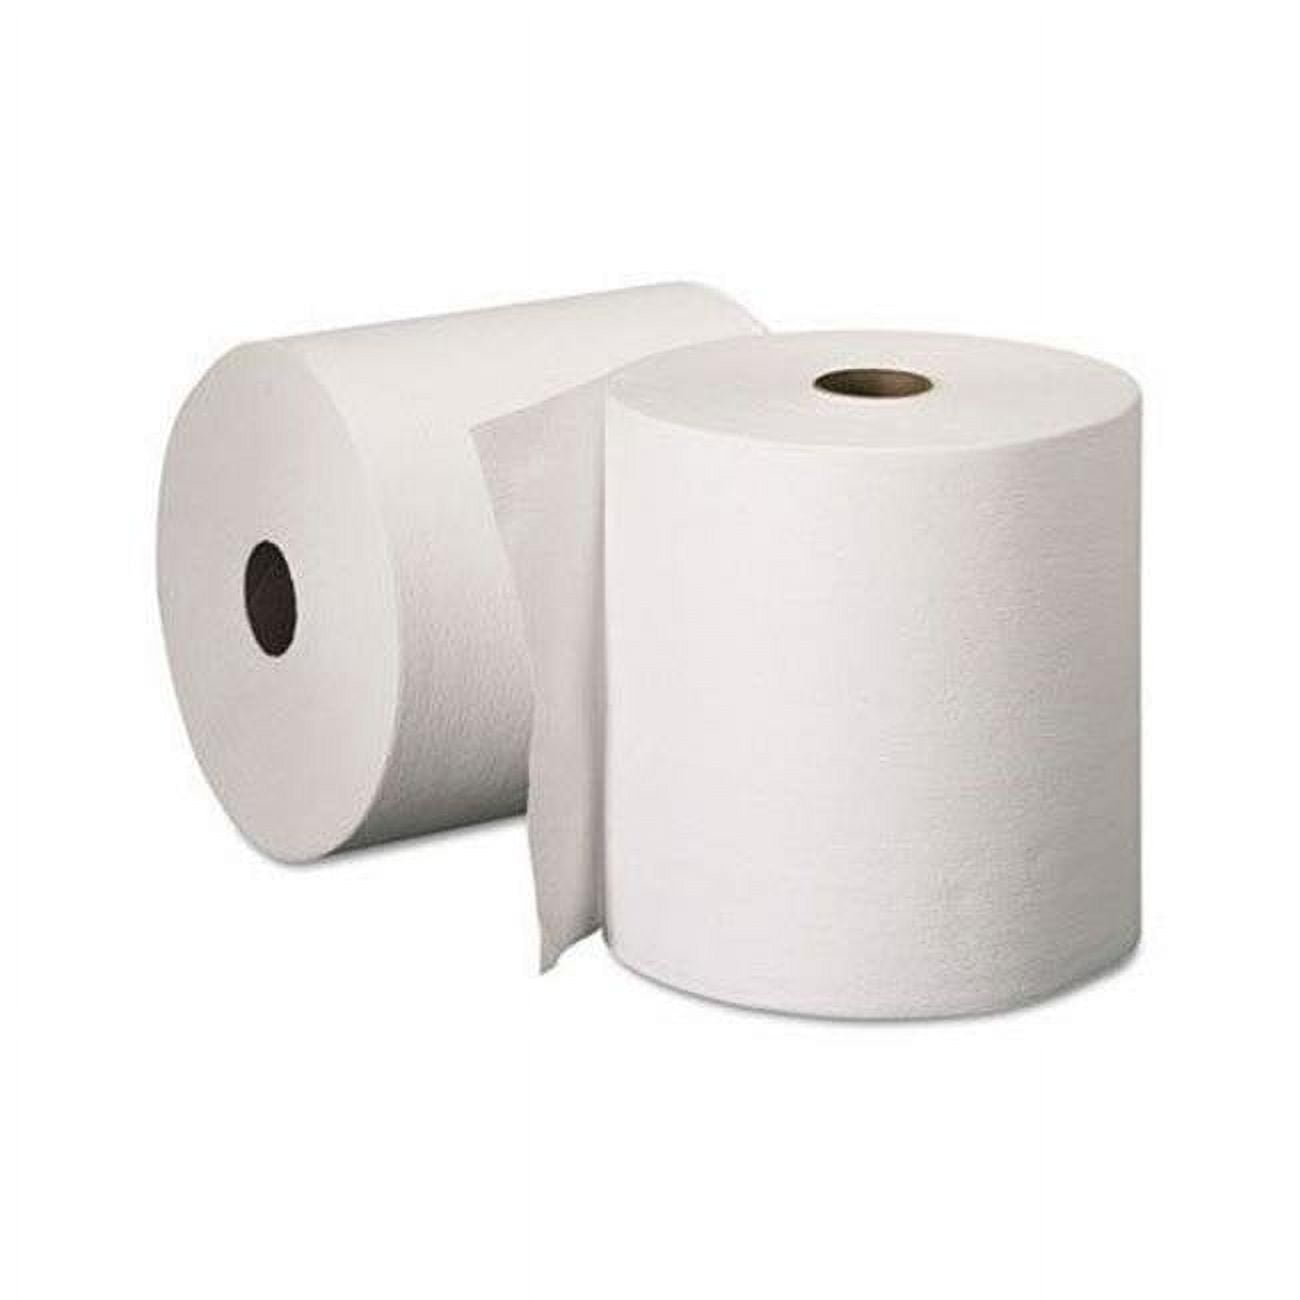 50606 CPC 8 in. x 600 ft. 1-Ply Kleenex Hard Roll Towel, White - Case of 6 -  Kimberly-Clark, 50606  CPC